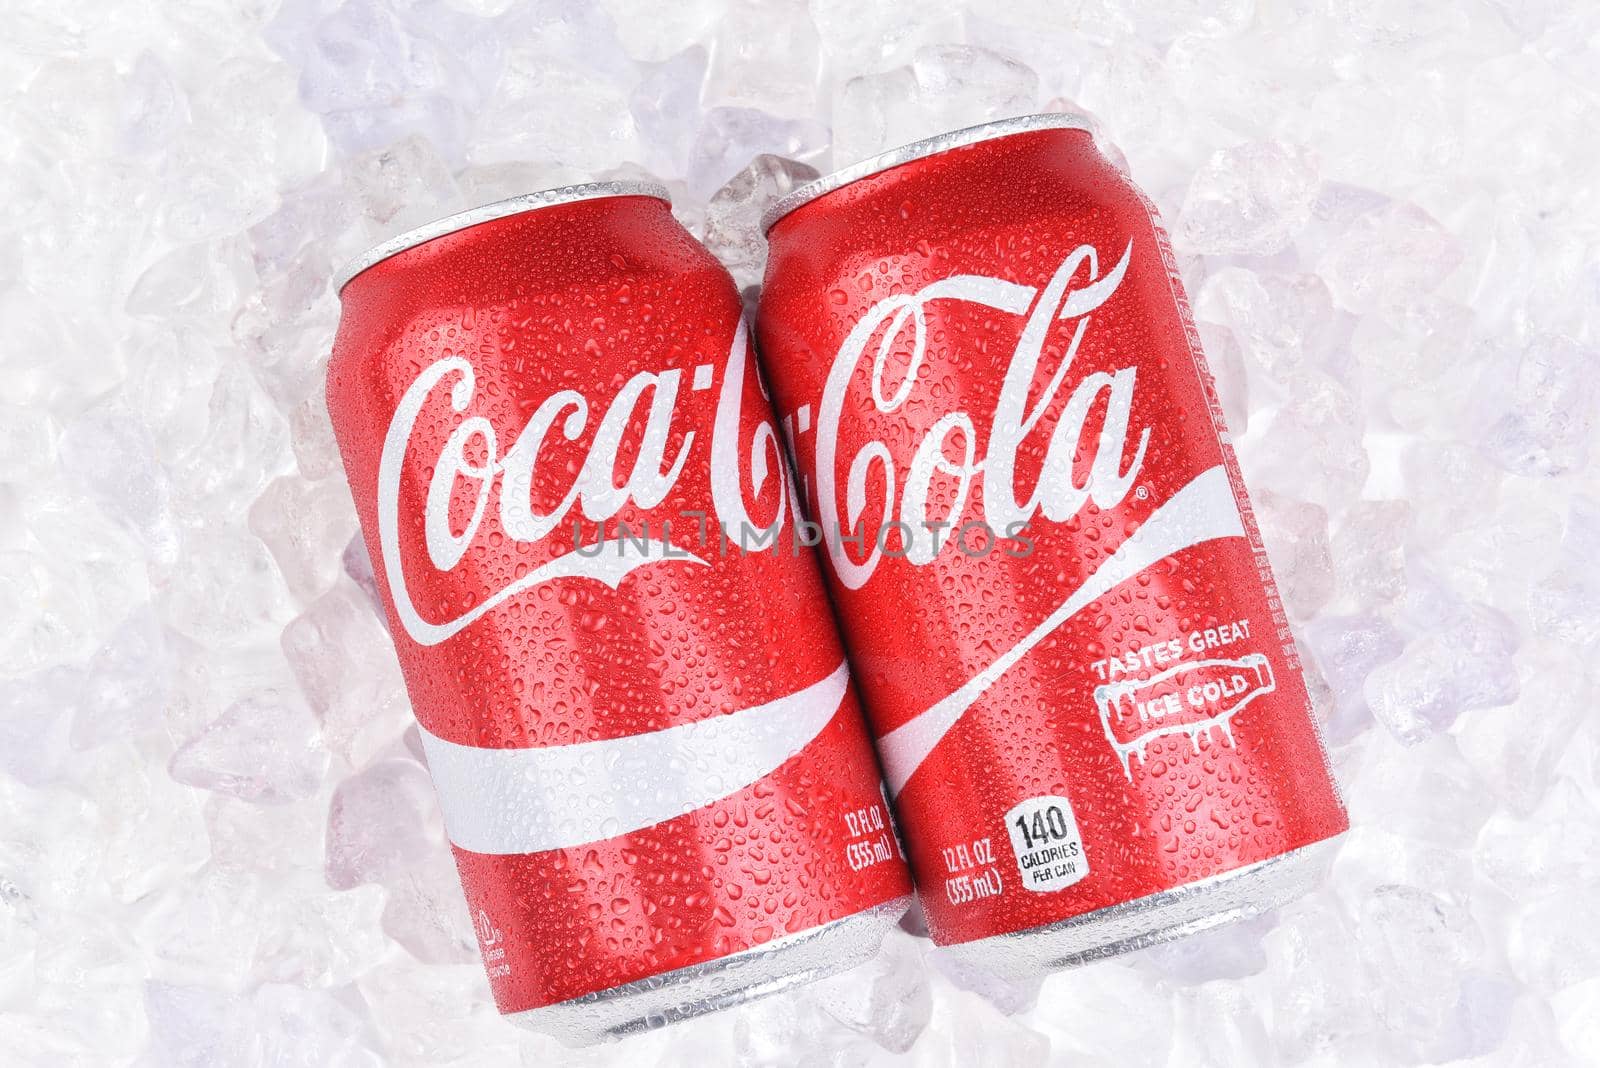 IRVINE, CALIFORNIA - JULY 10, 2017: Two Coca-Cola Cans on a bed of ice with condensation. Coke is the most popular carbonated soft drink in the world.